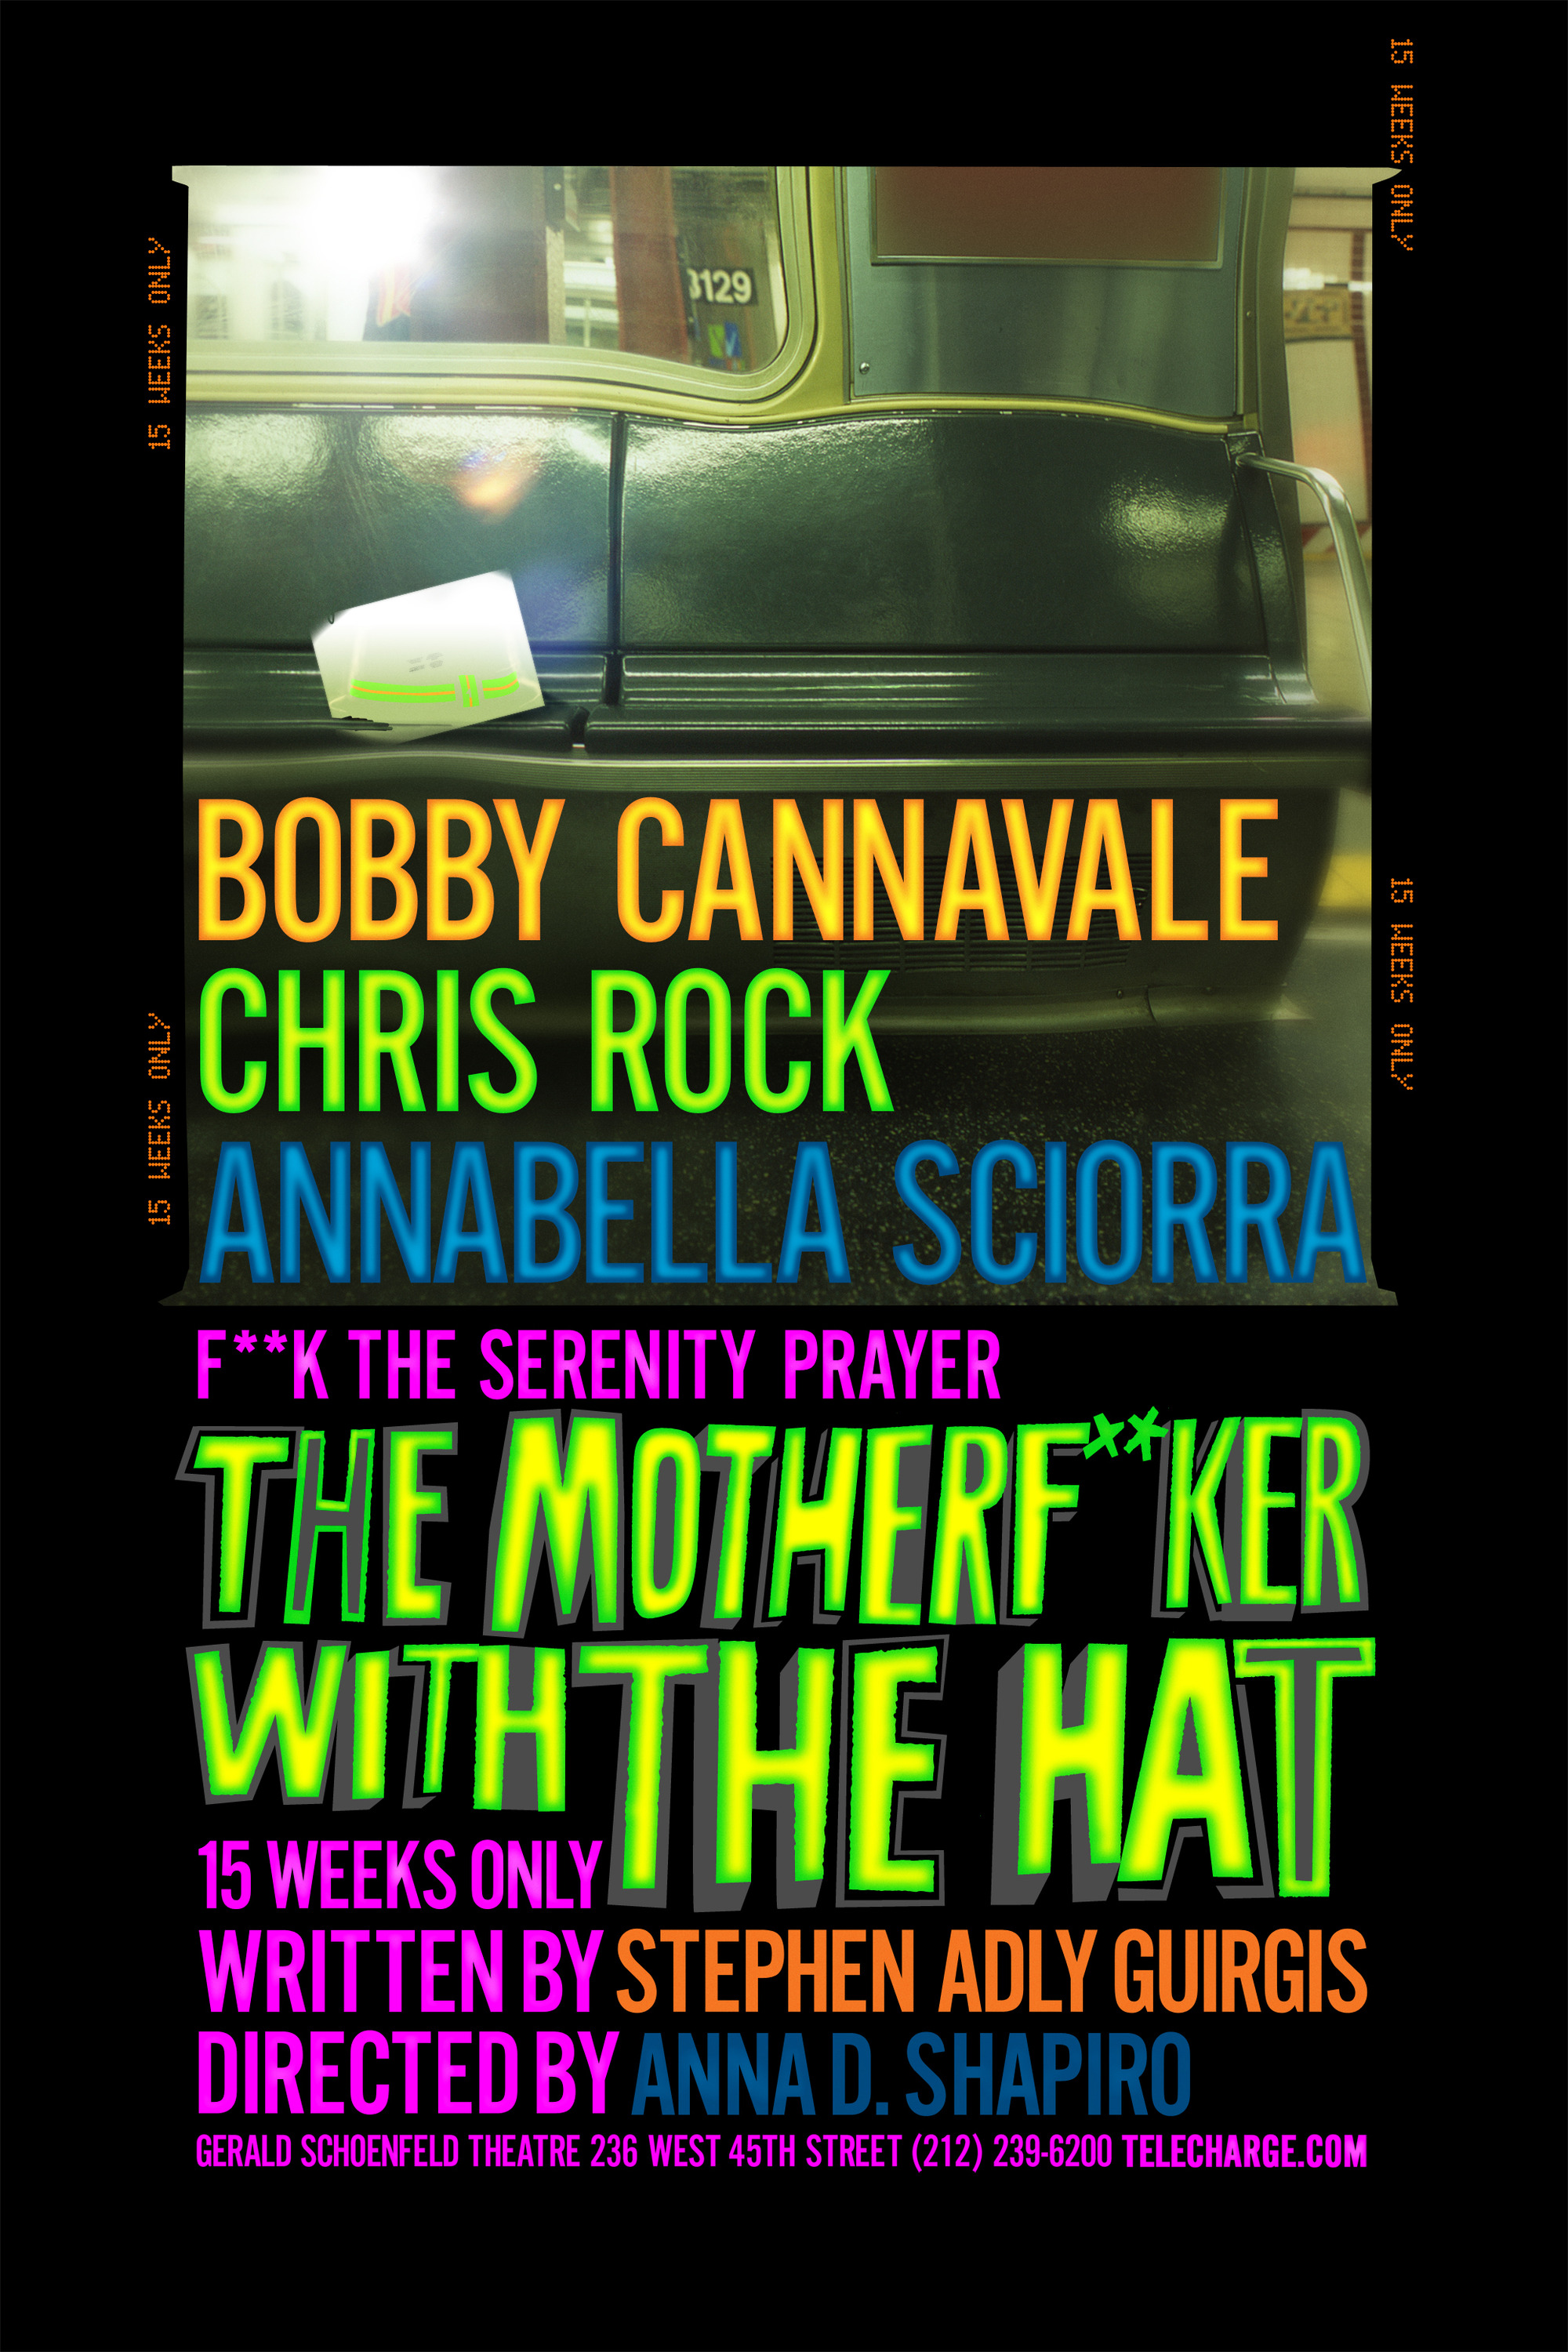 Mega Sized Broadway Poster Image for The Motherfucker with the Hat 